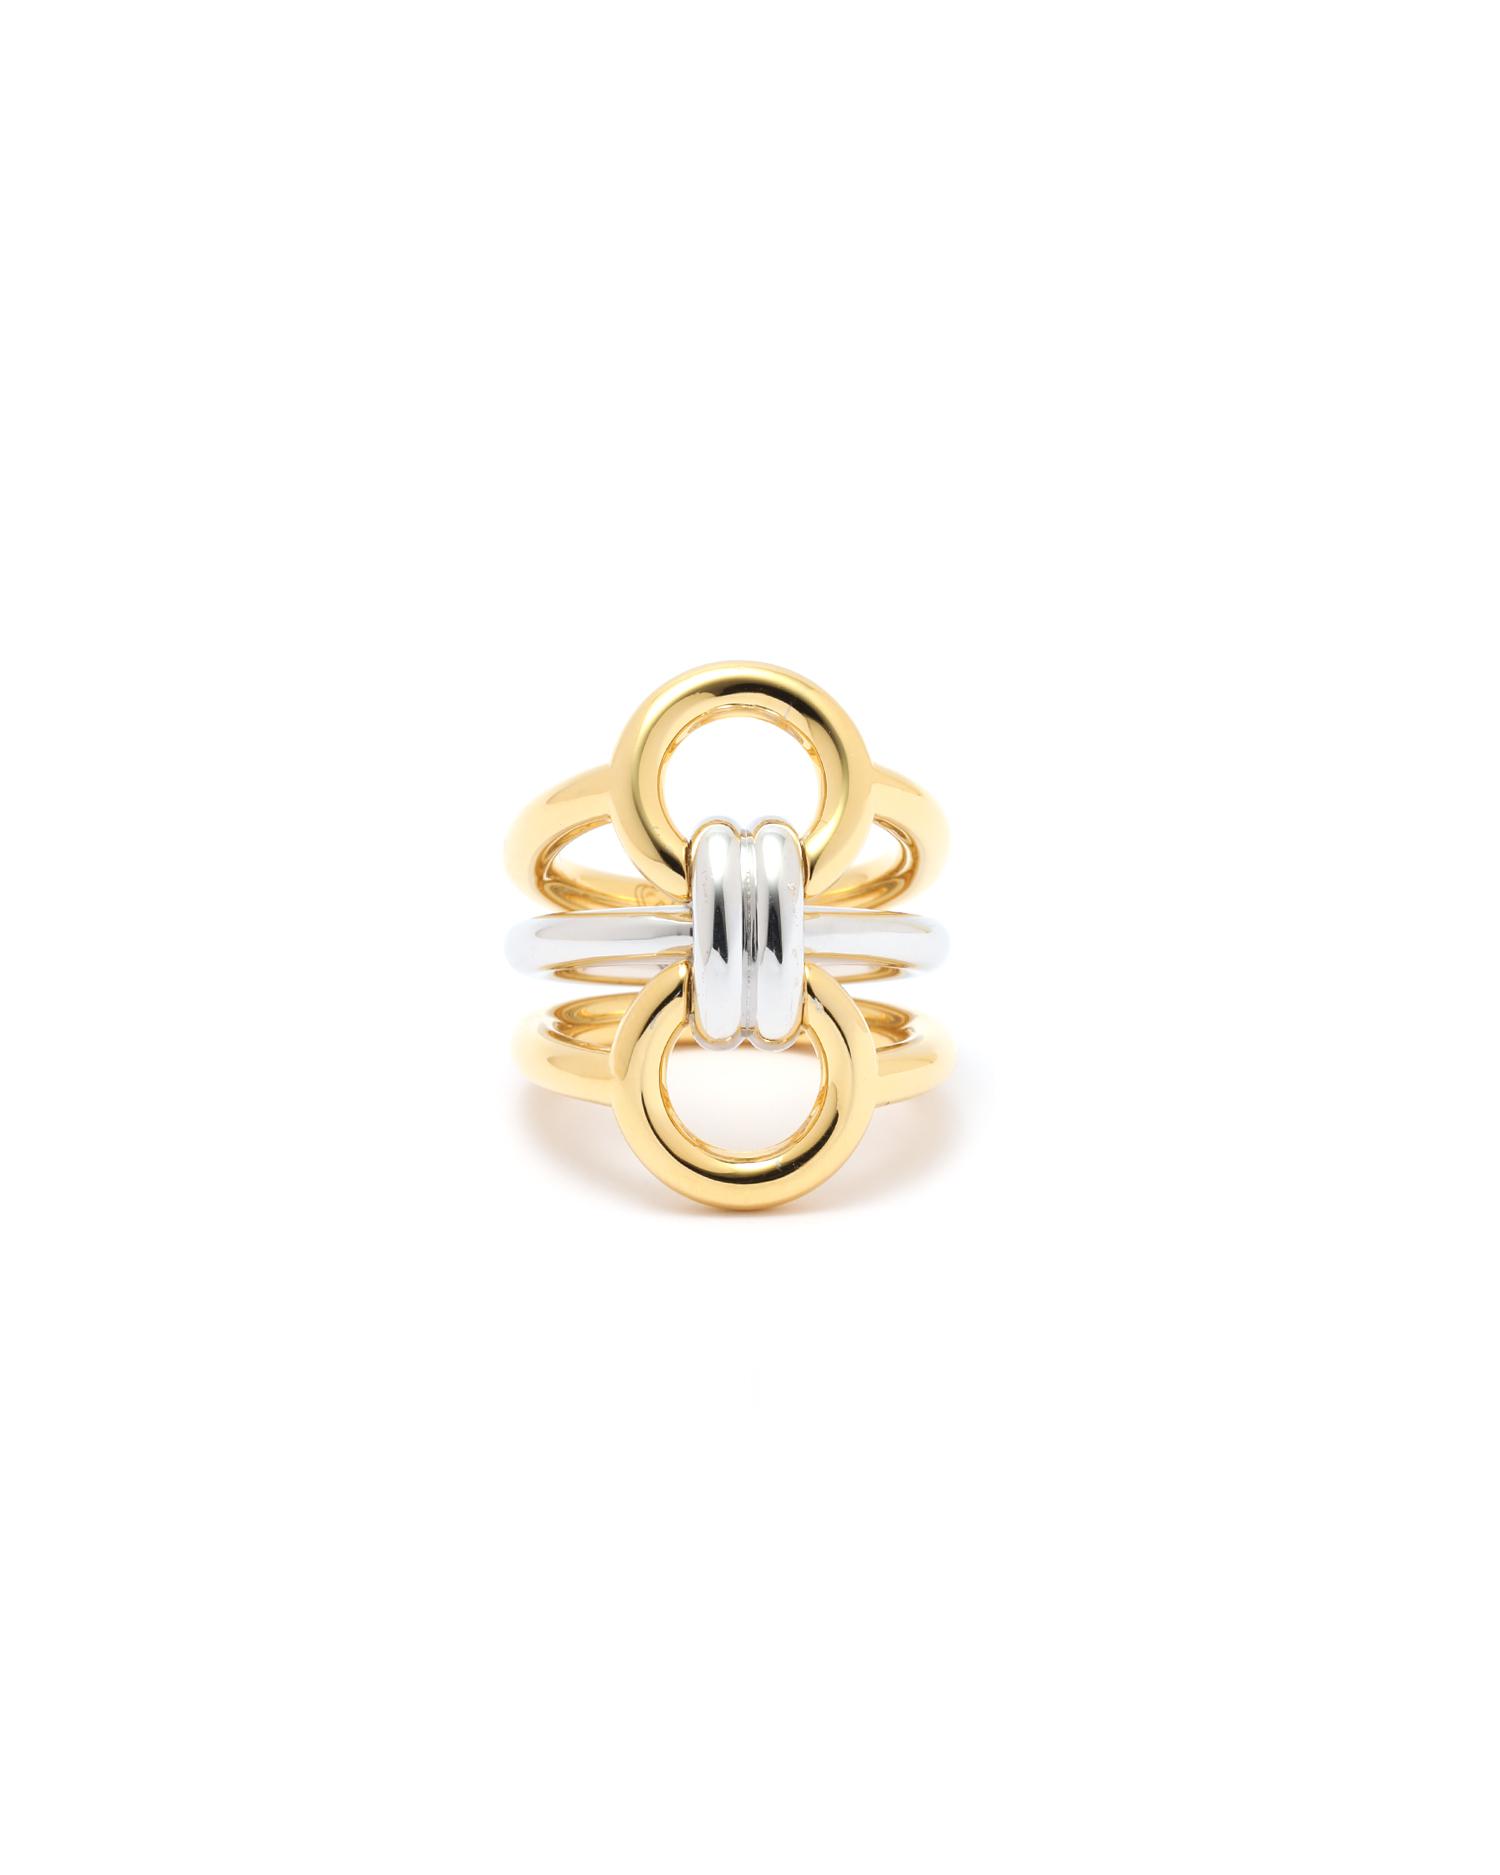 Trypitch detachable ring by CHARLOTTE CHESNAIS